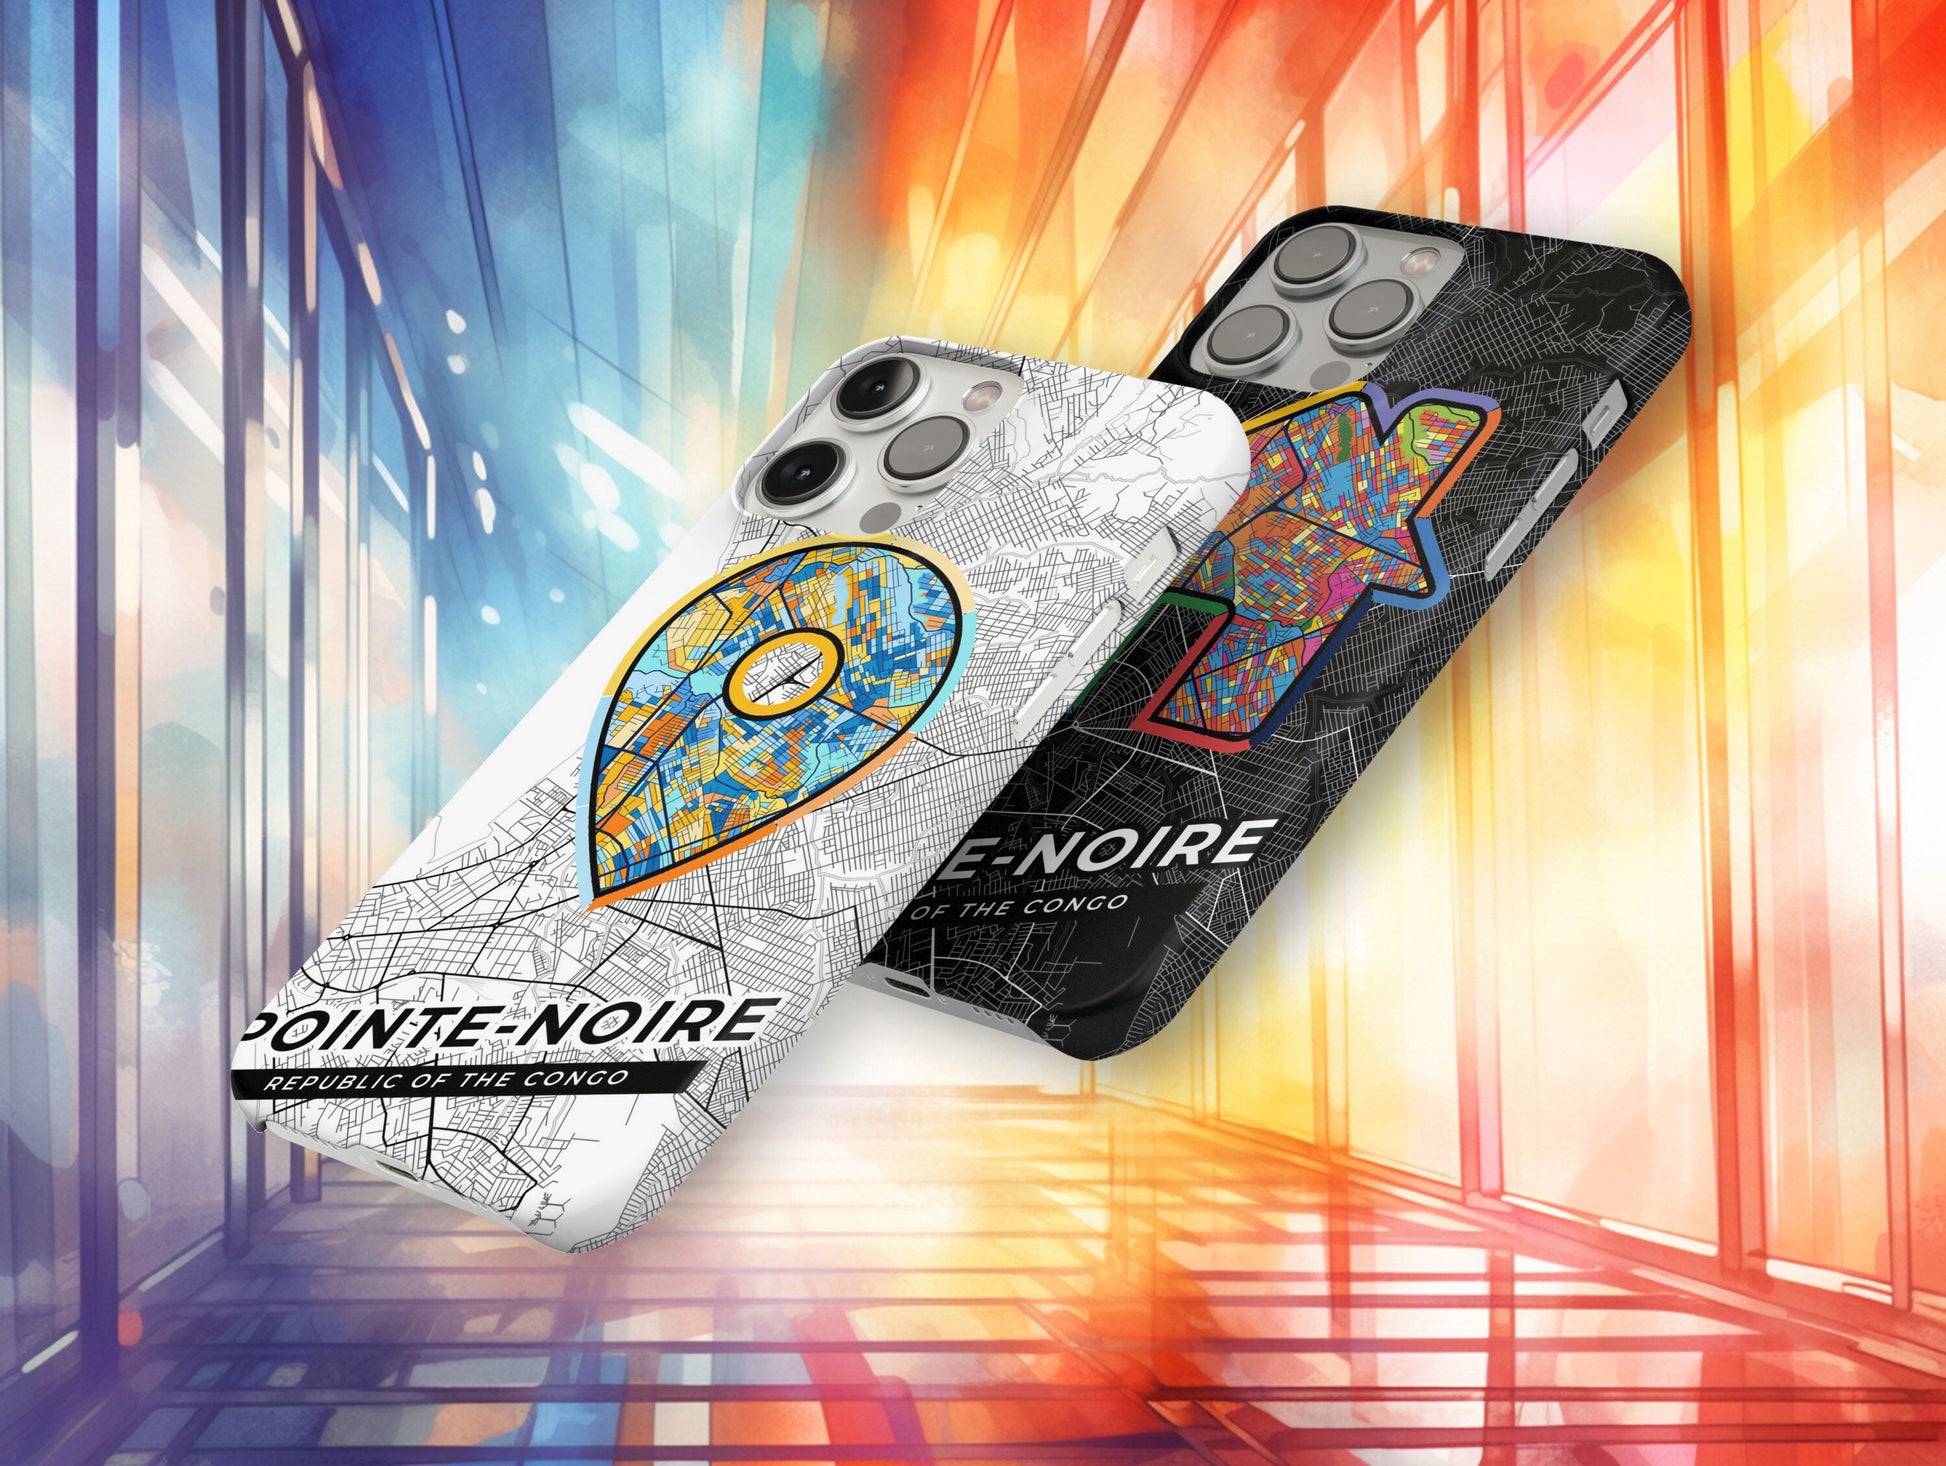 Pointe-Noire Republic Of The Congo slim phone case with colorful icon